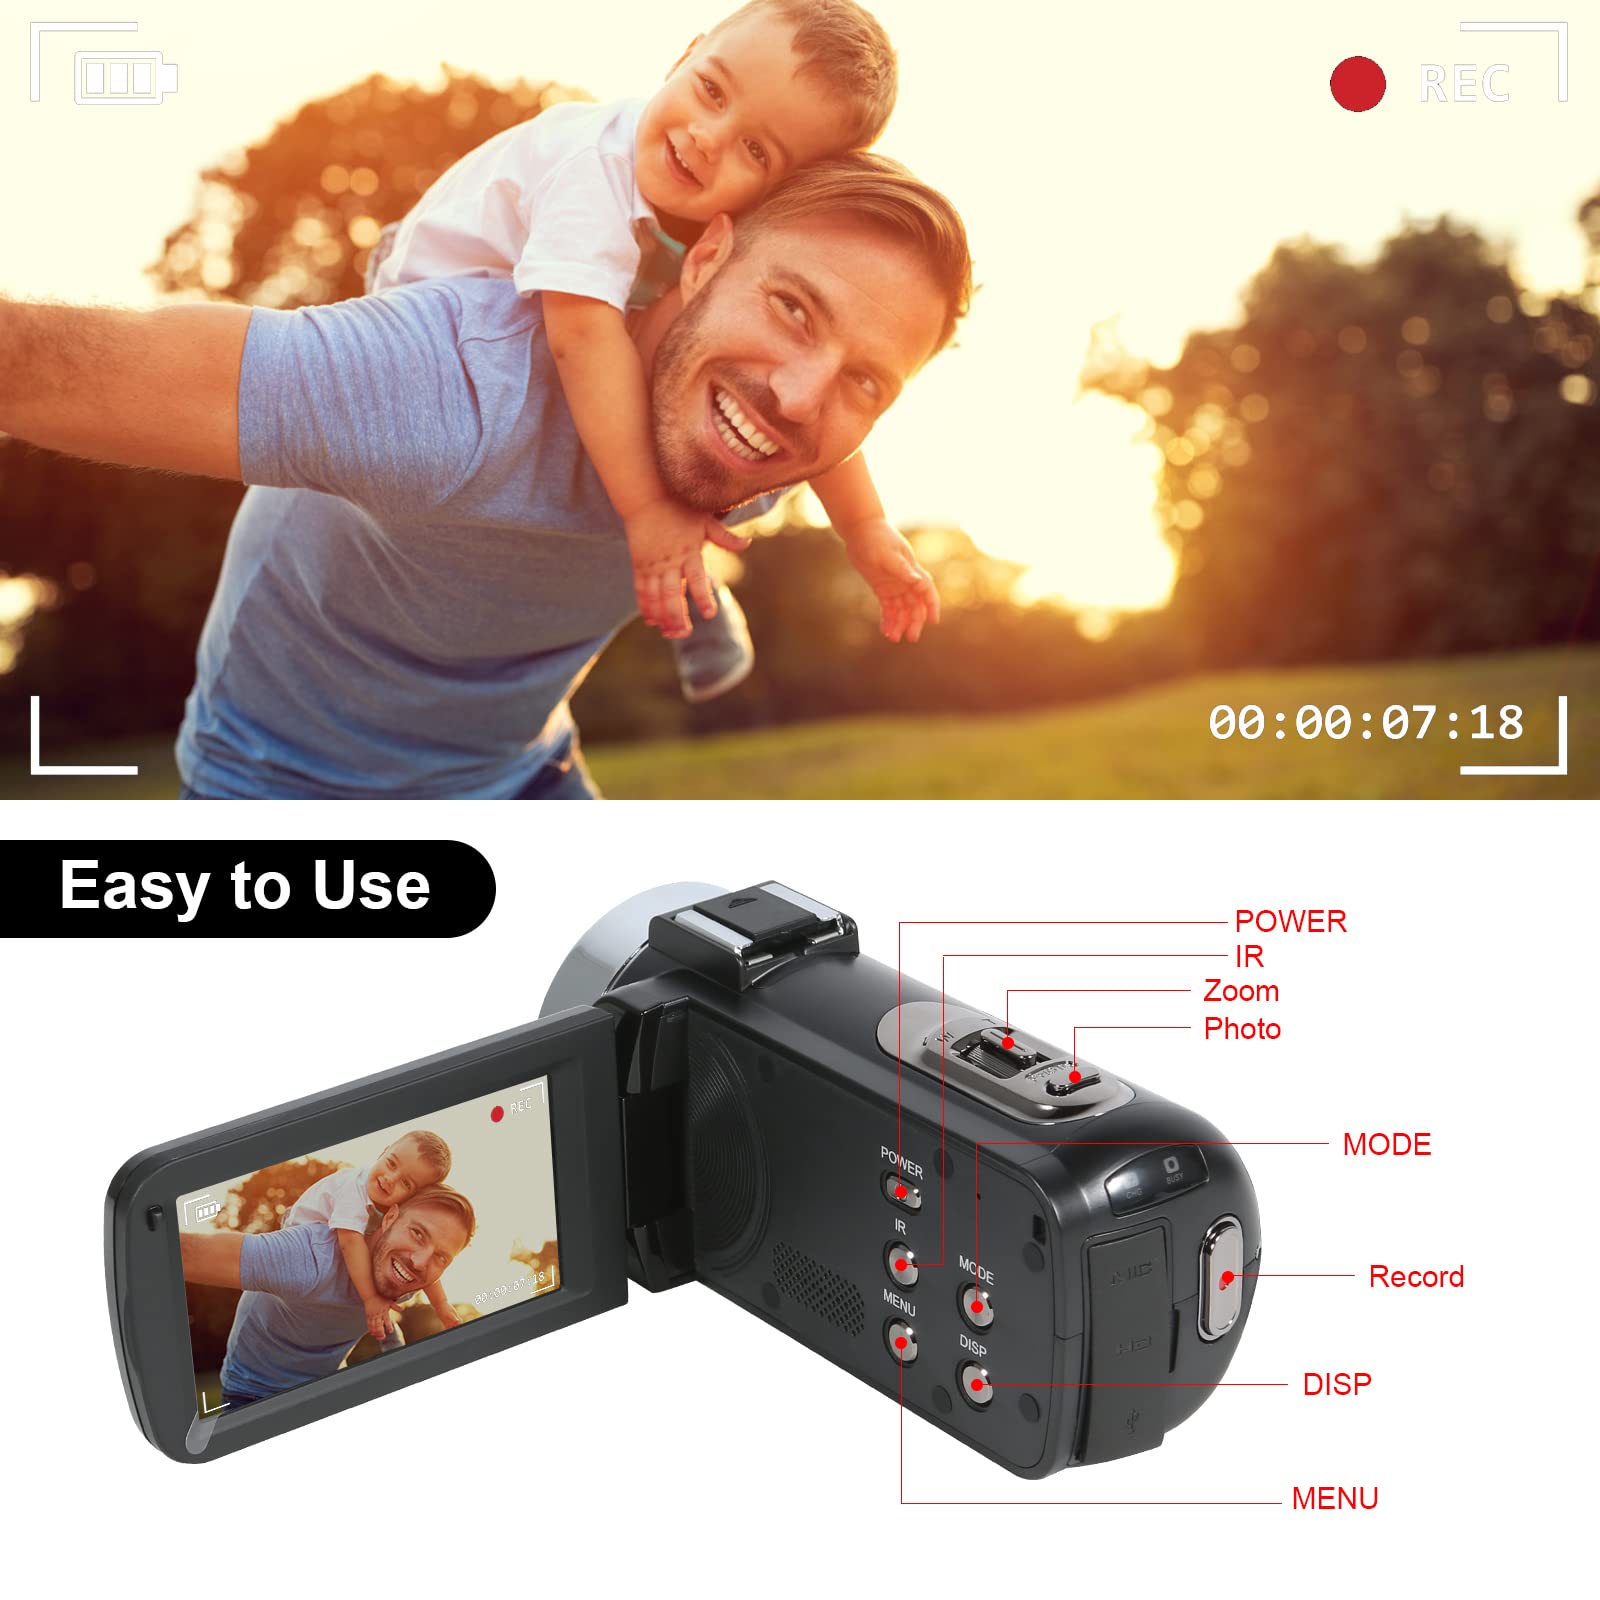 KOMERY Video Camera 4K, Camera for YouTube Live Streaming 56MP, Easy to Use Vlogging Camera with External Microphone, IR Night Vision 16X Digital Zoom WiFi Remote Control Video Recorder